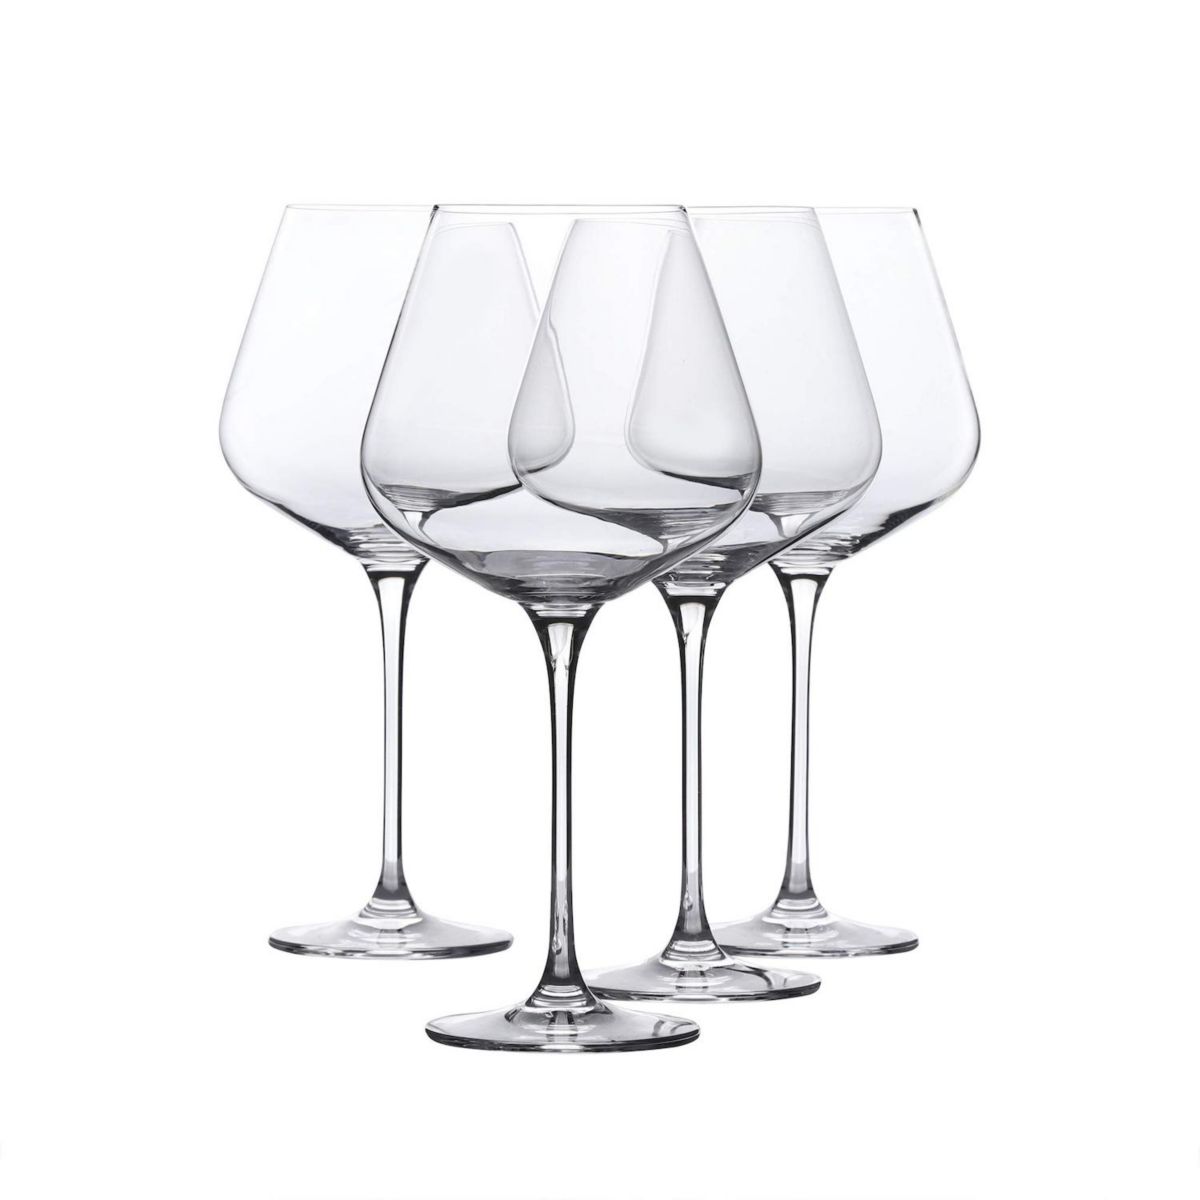 Hand Blown Italian Style Crystal Clear Champagne Flute Set With Stem - Premium Glasses As Gift Whole Houseware